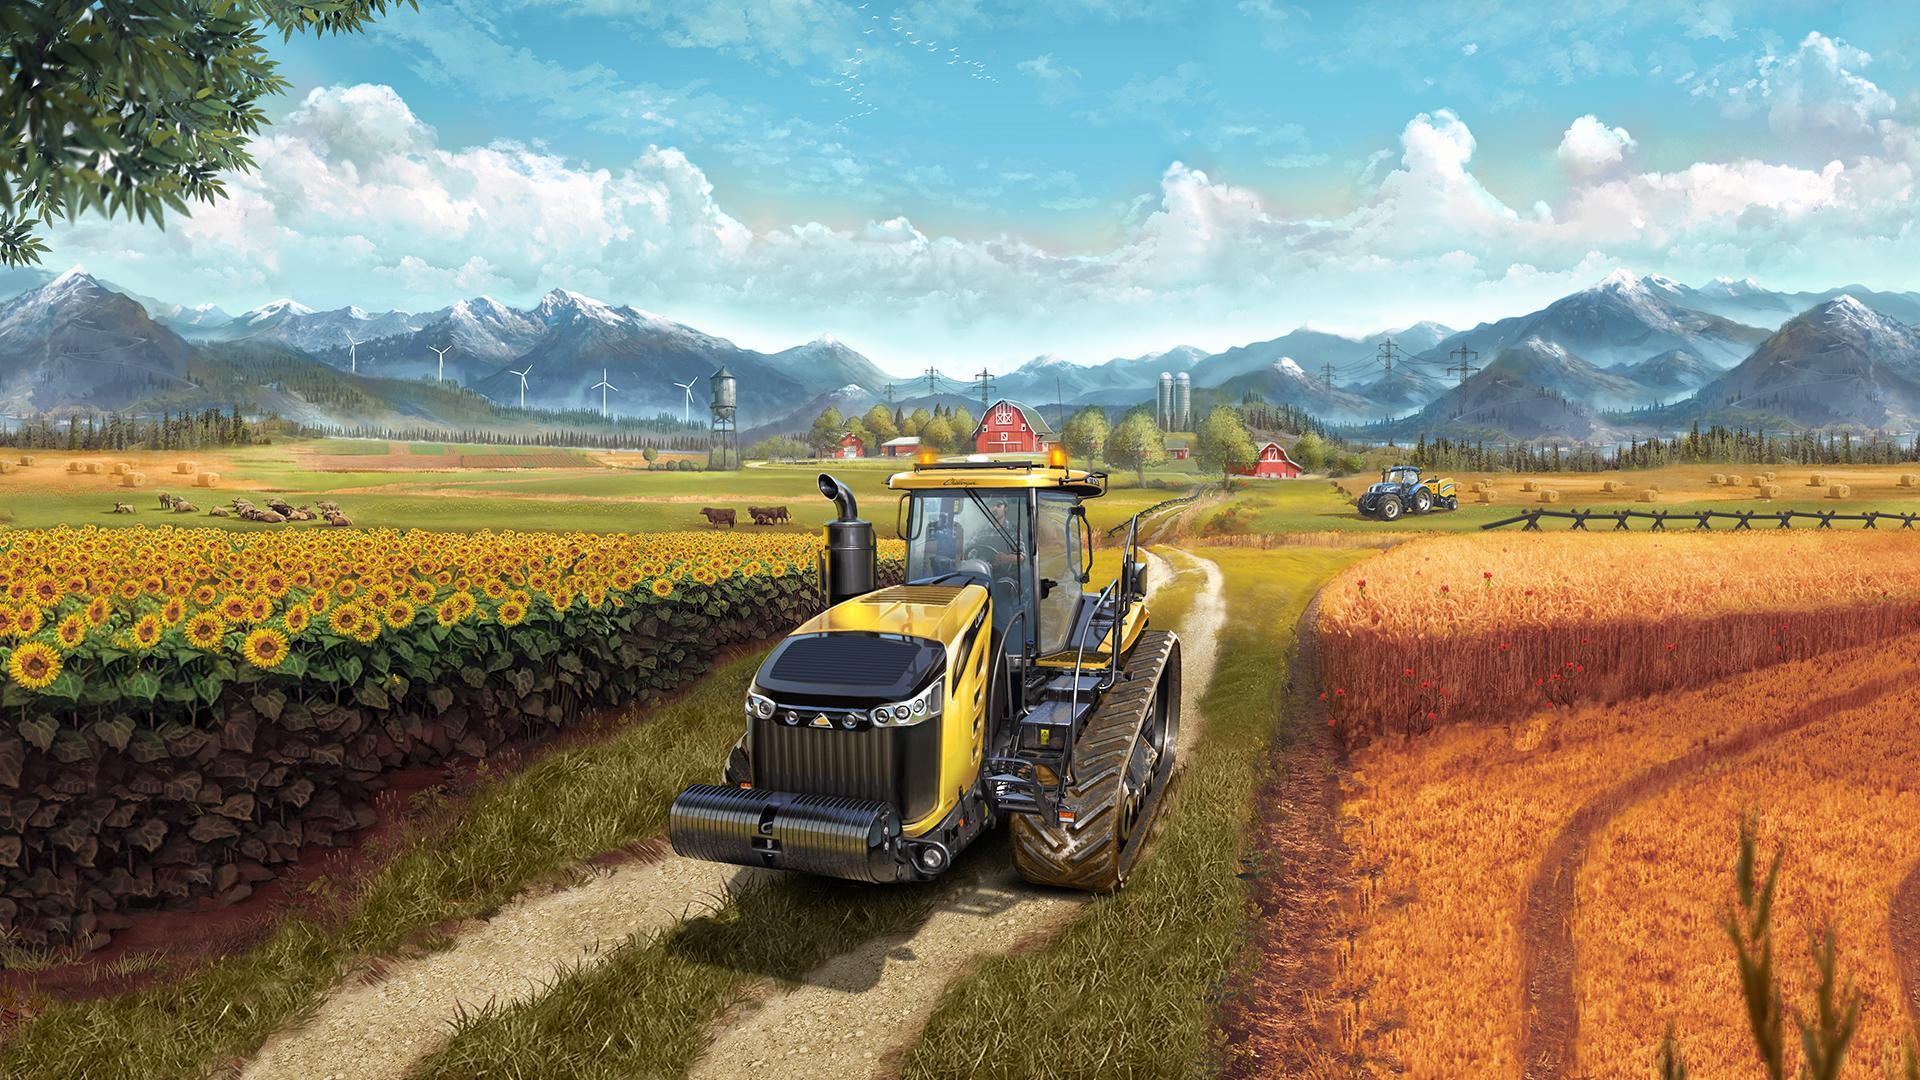 farming-simulator-17-how-to-get-unlimited-money-cheat